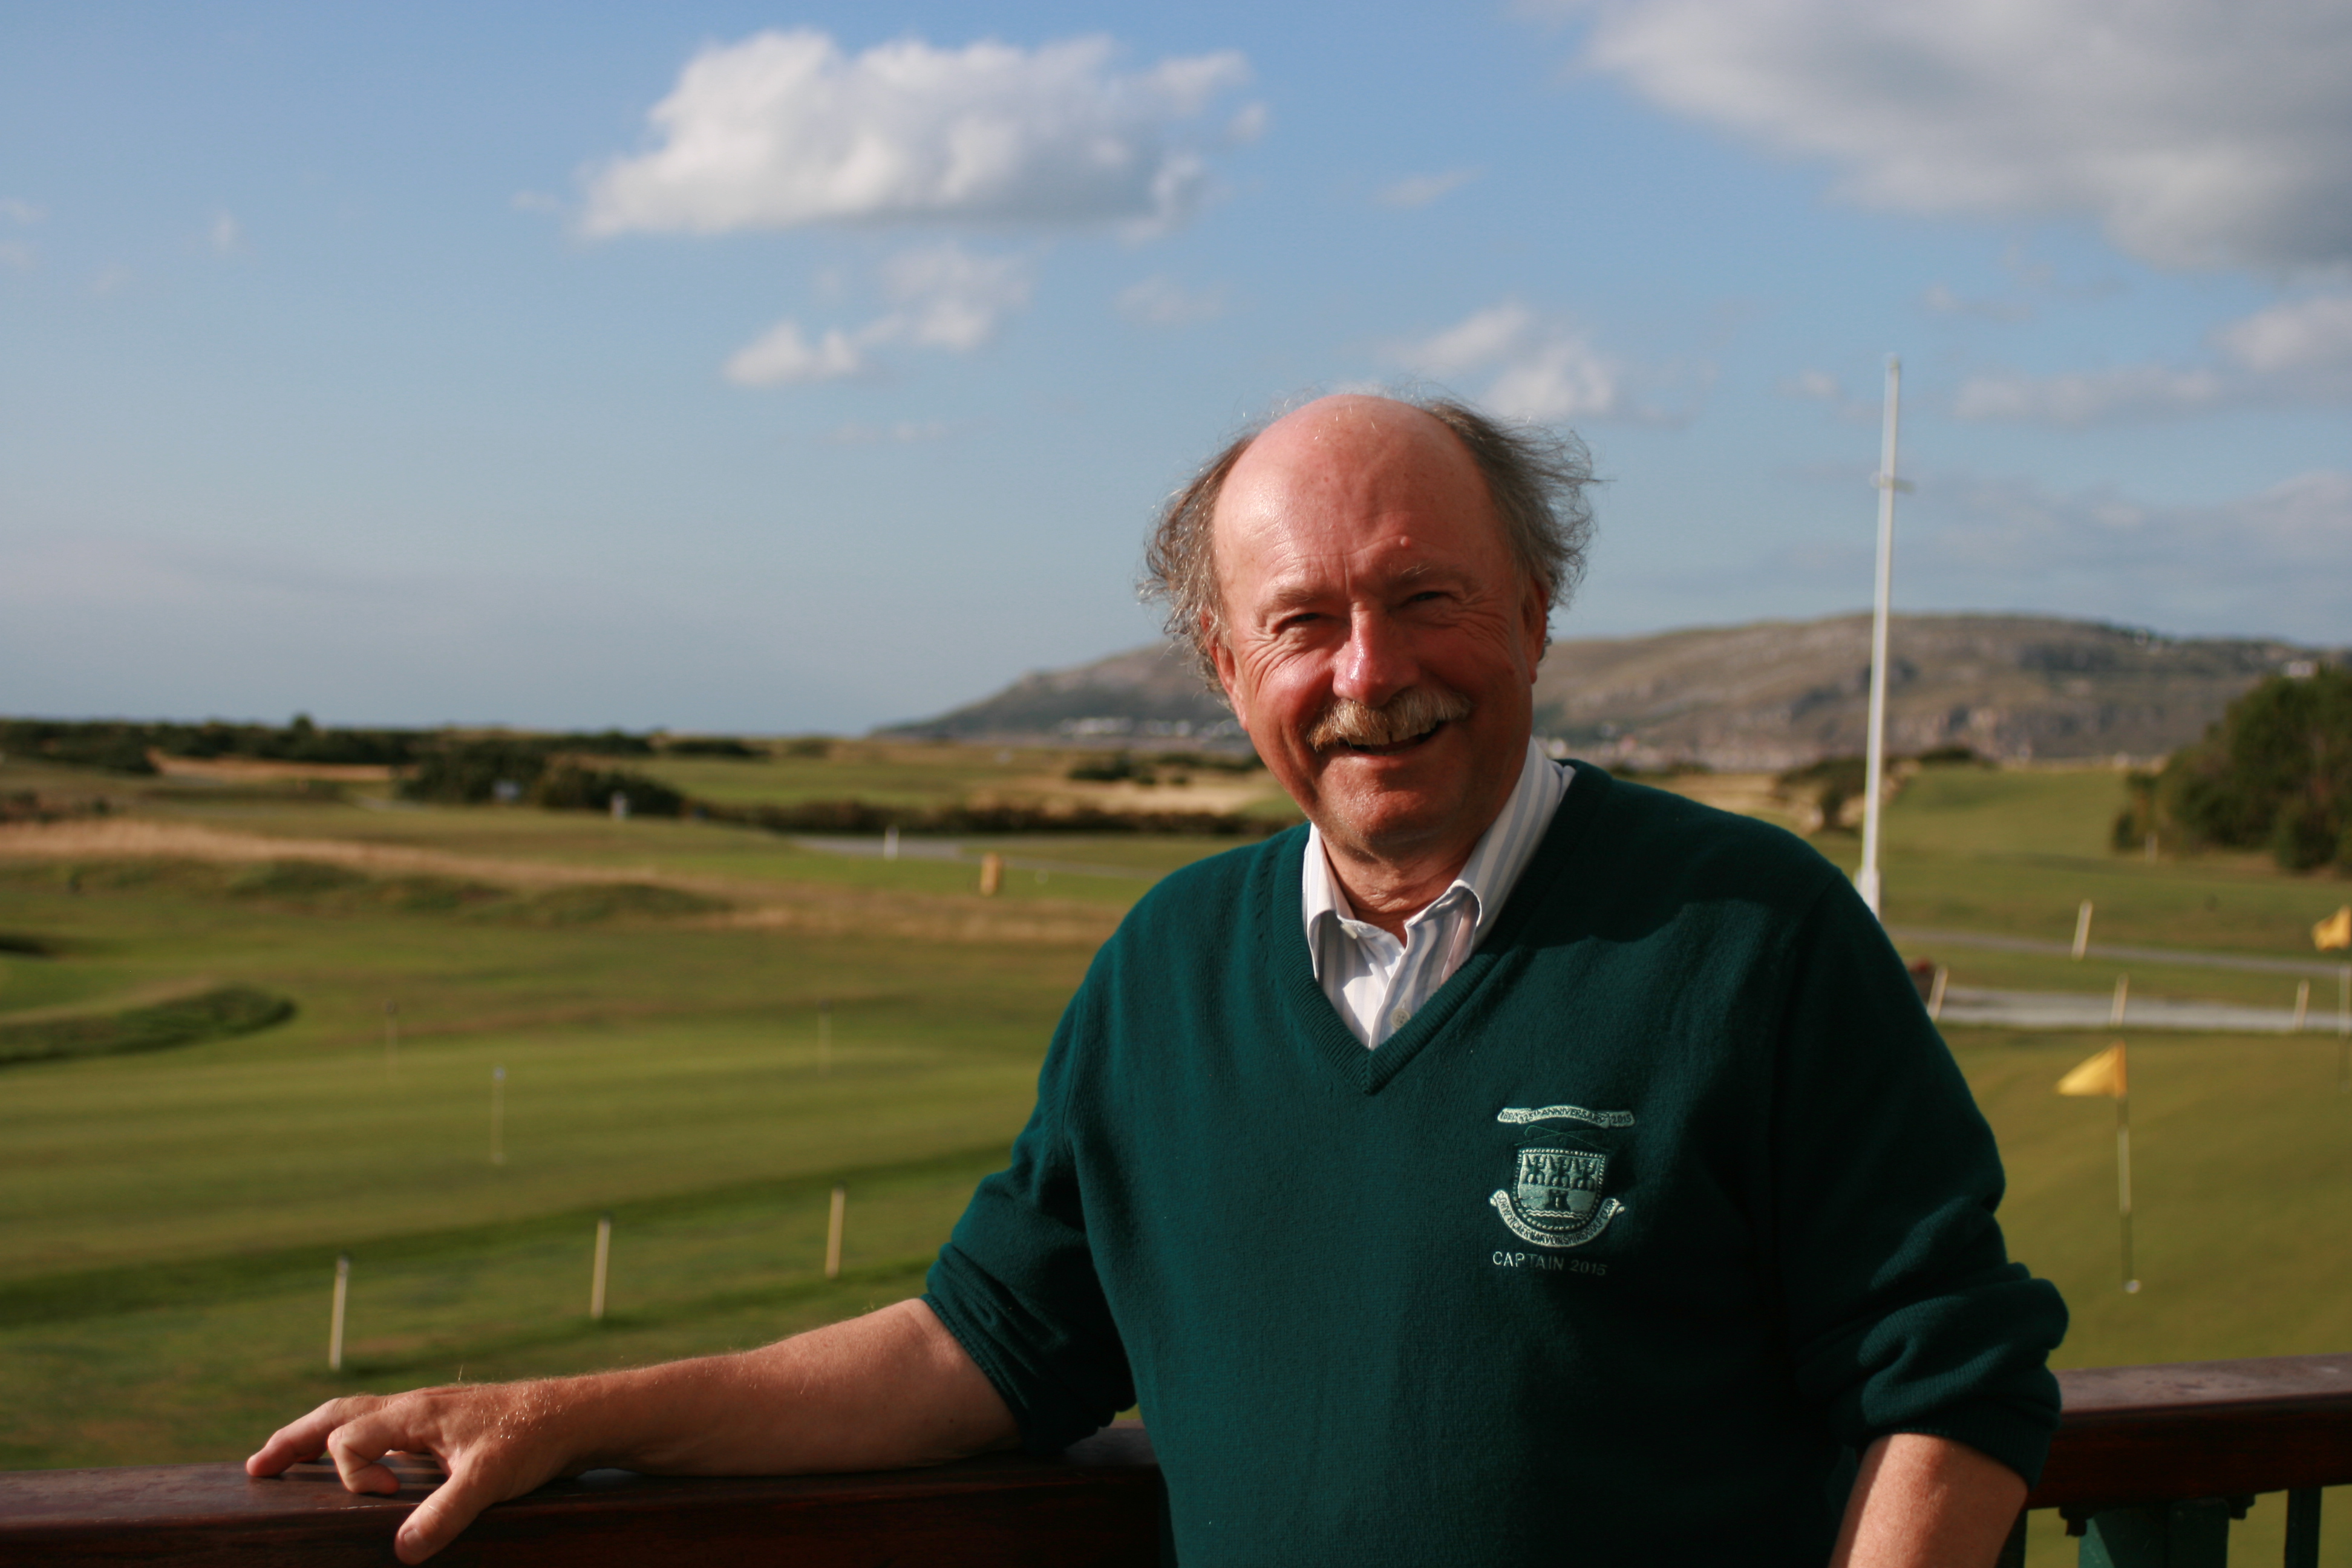 Wales, day two: Conwy Golf Club, honoring the past, hopeful for the future in North Wales